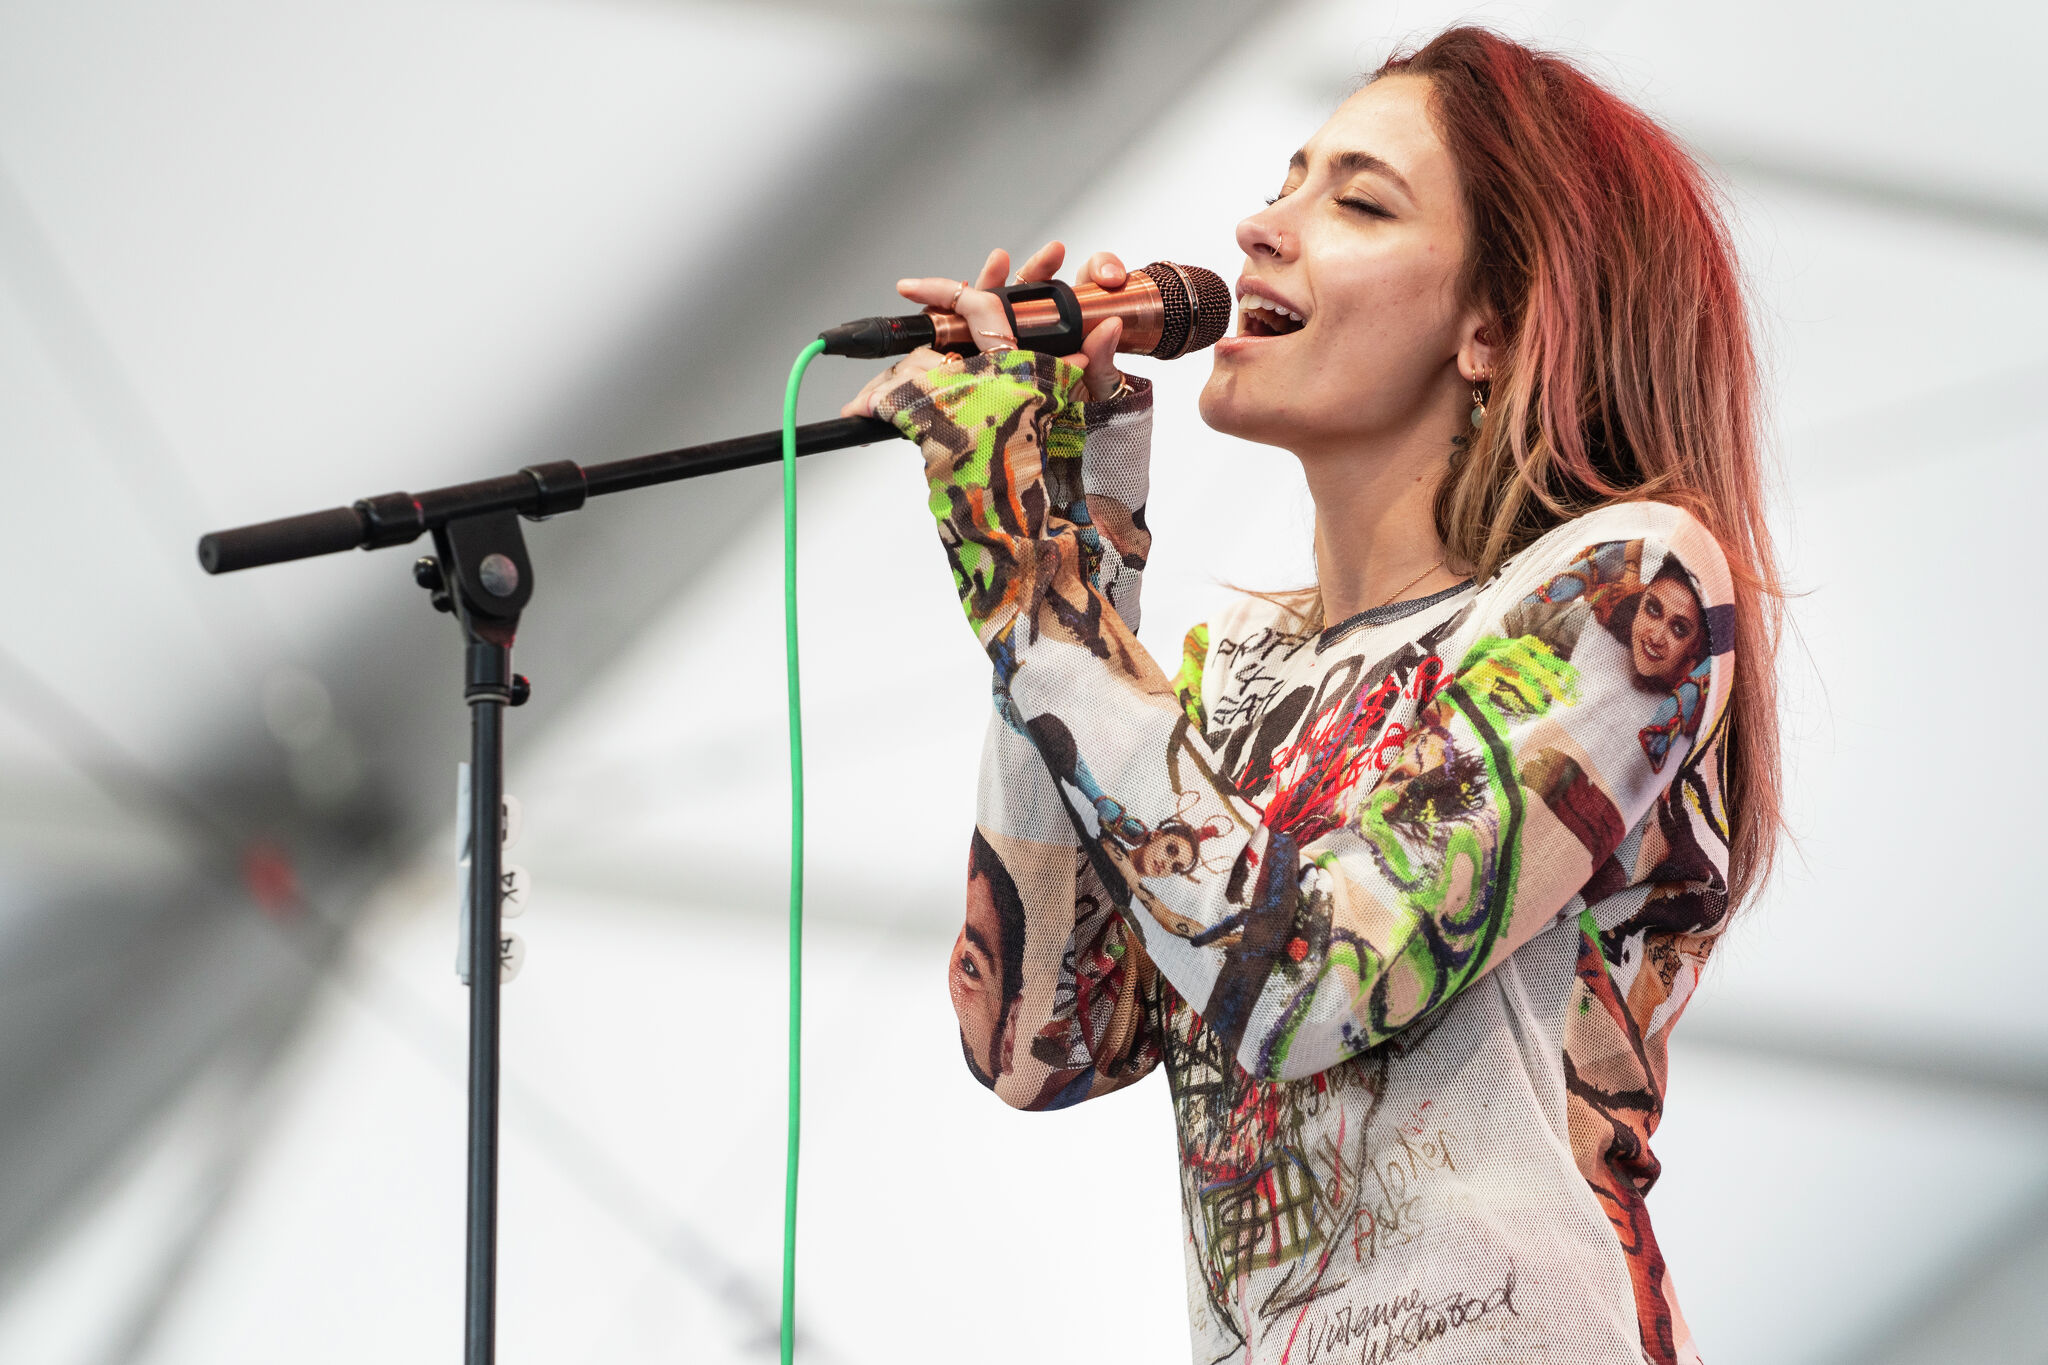 Paris Jackson to open for Incubus at Mohegan Sun show in CT